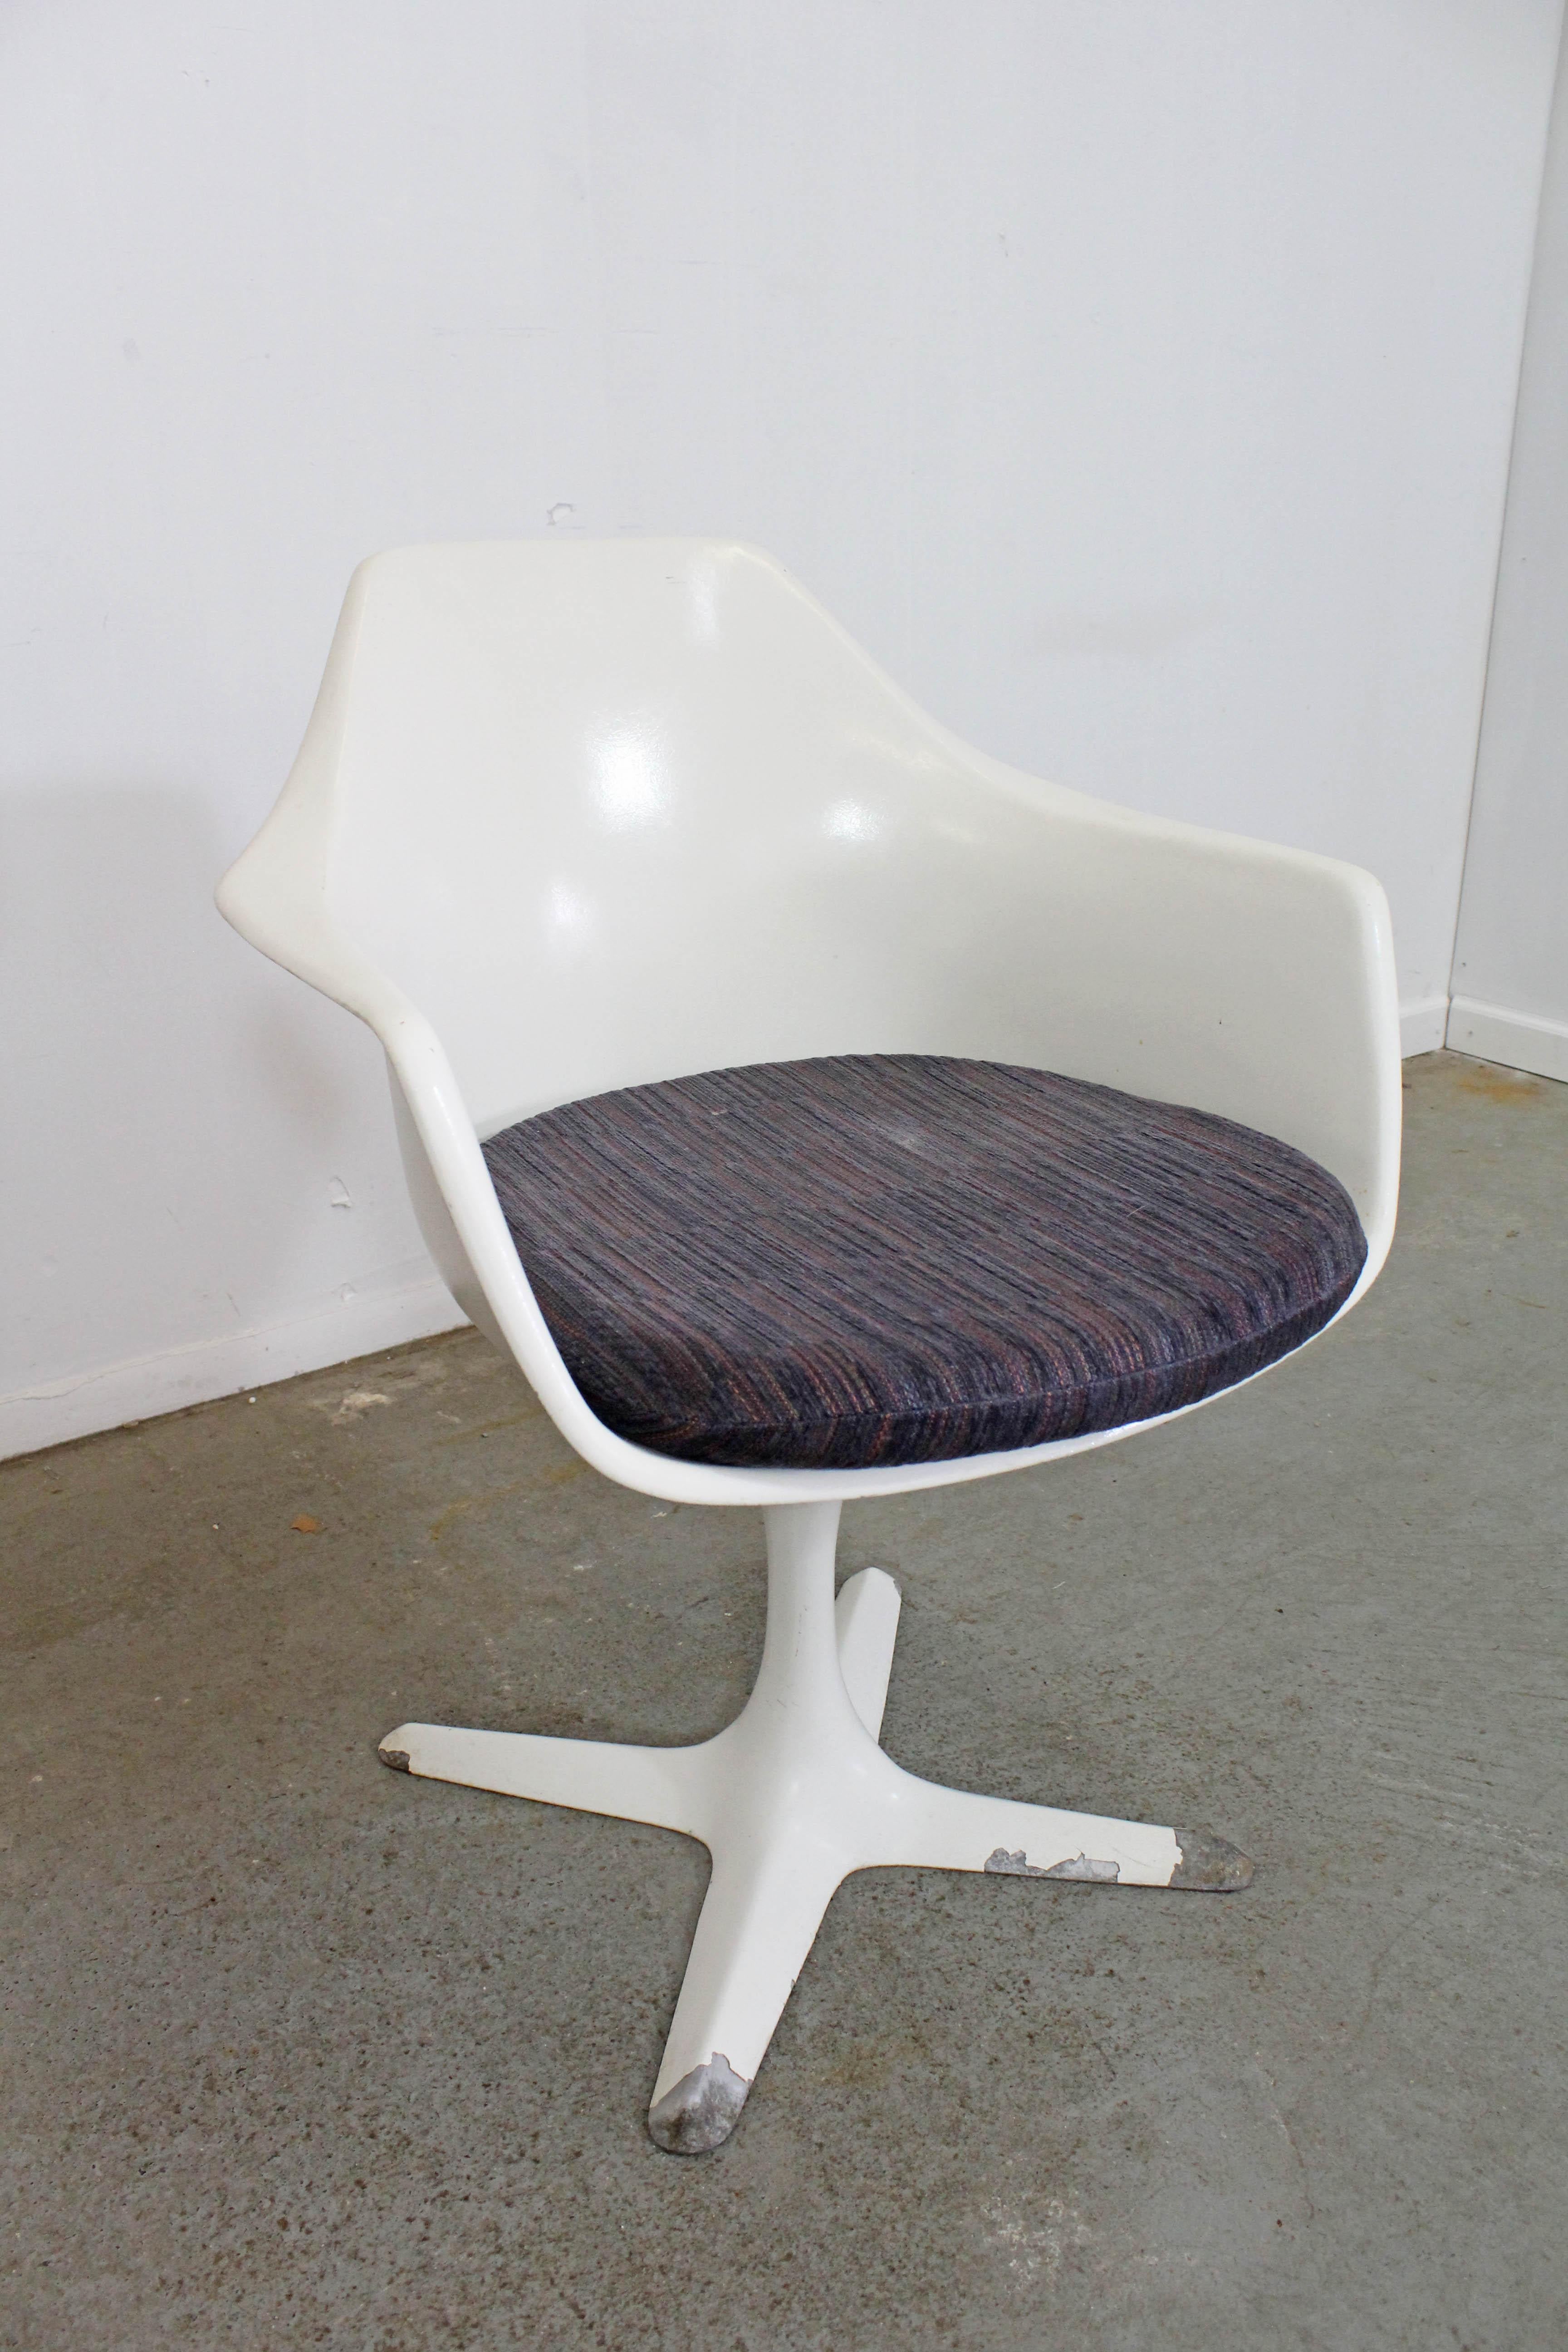 Offered is a white tulip swivel armchair similar to the style of Eero Saarinen. Includes one white enamel armchairs with removable cushion. It is in decent condition, showing age wear (paint chipping in some areas, surface scratches, tear in